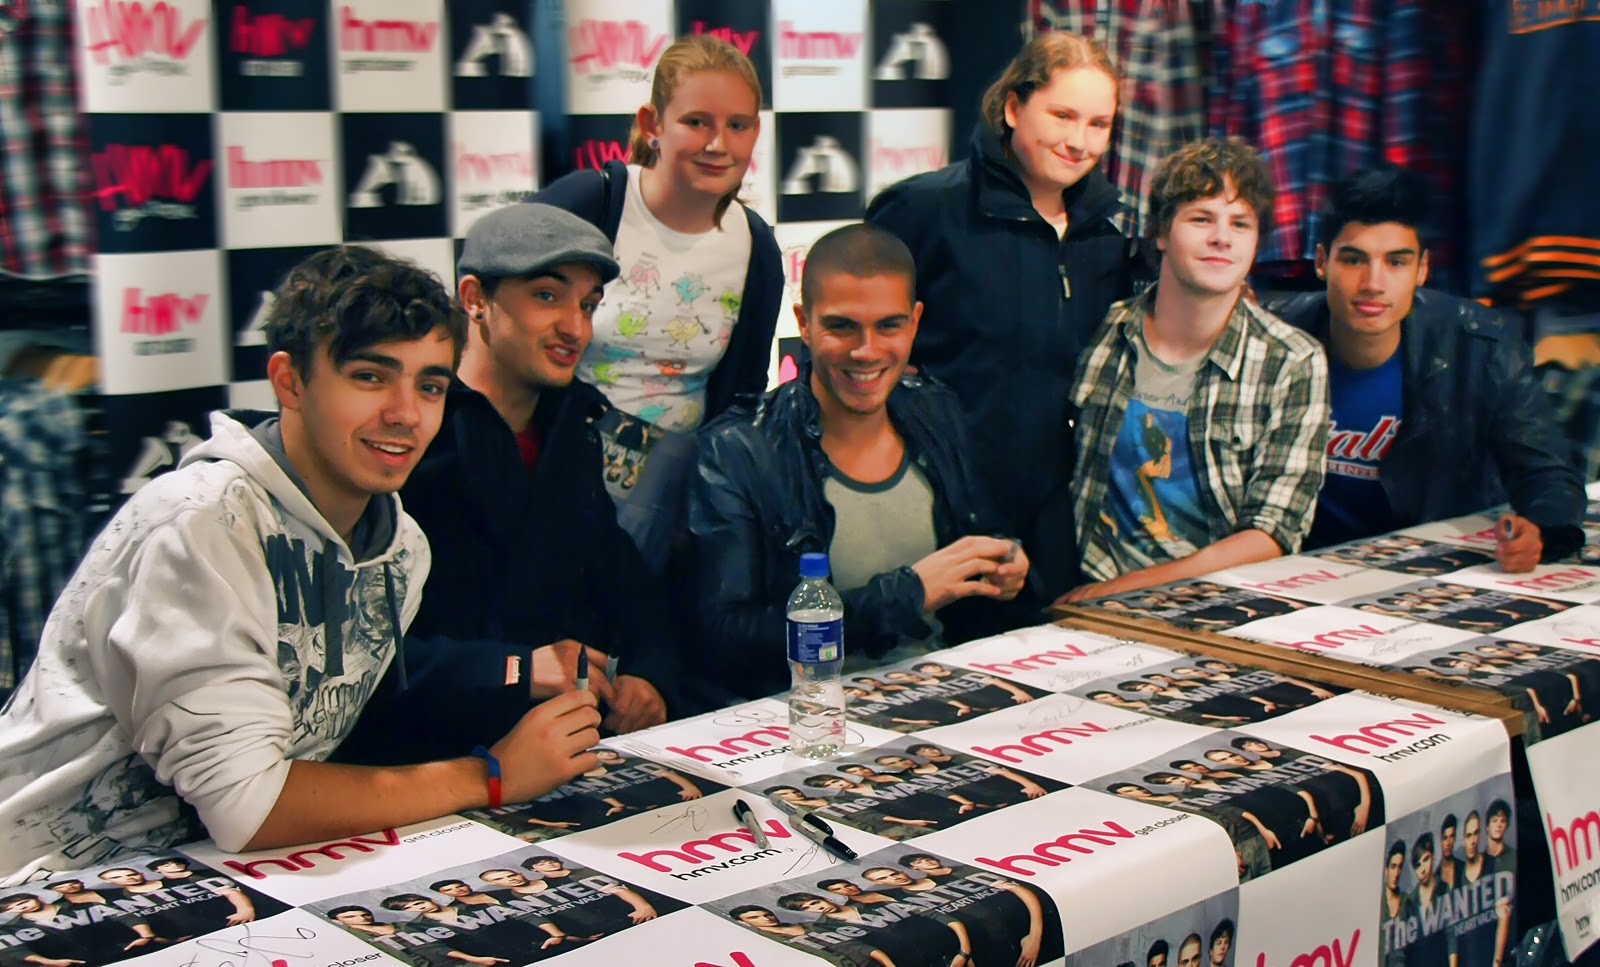 The+wanted+boy+band+names